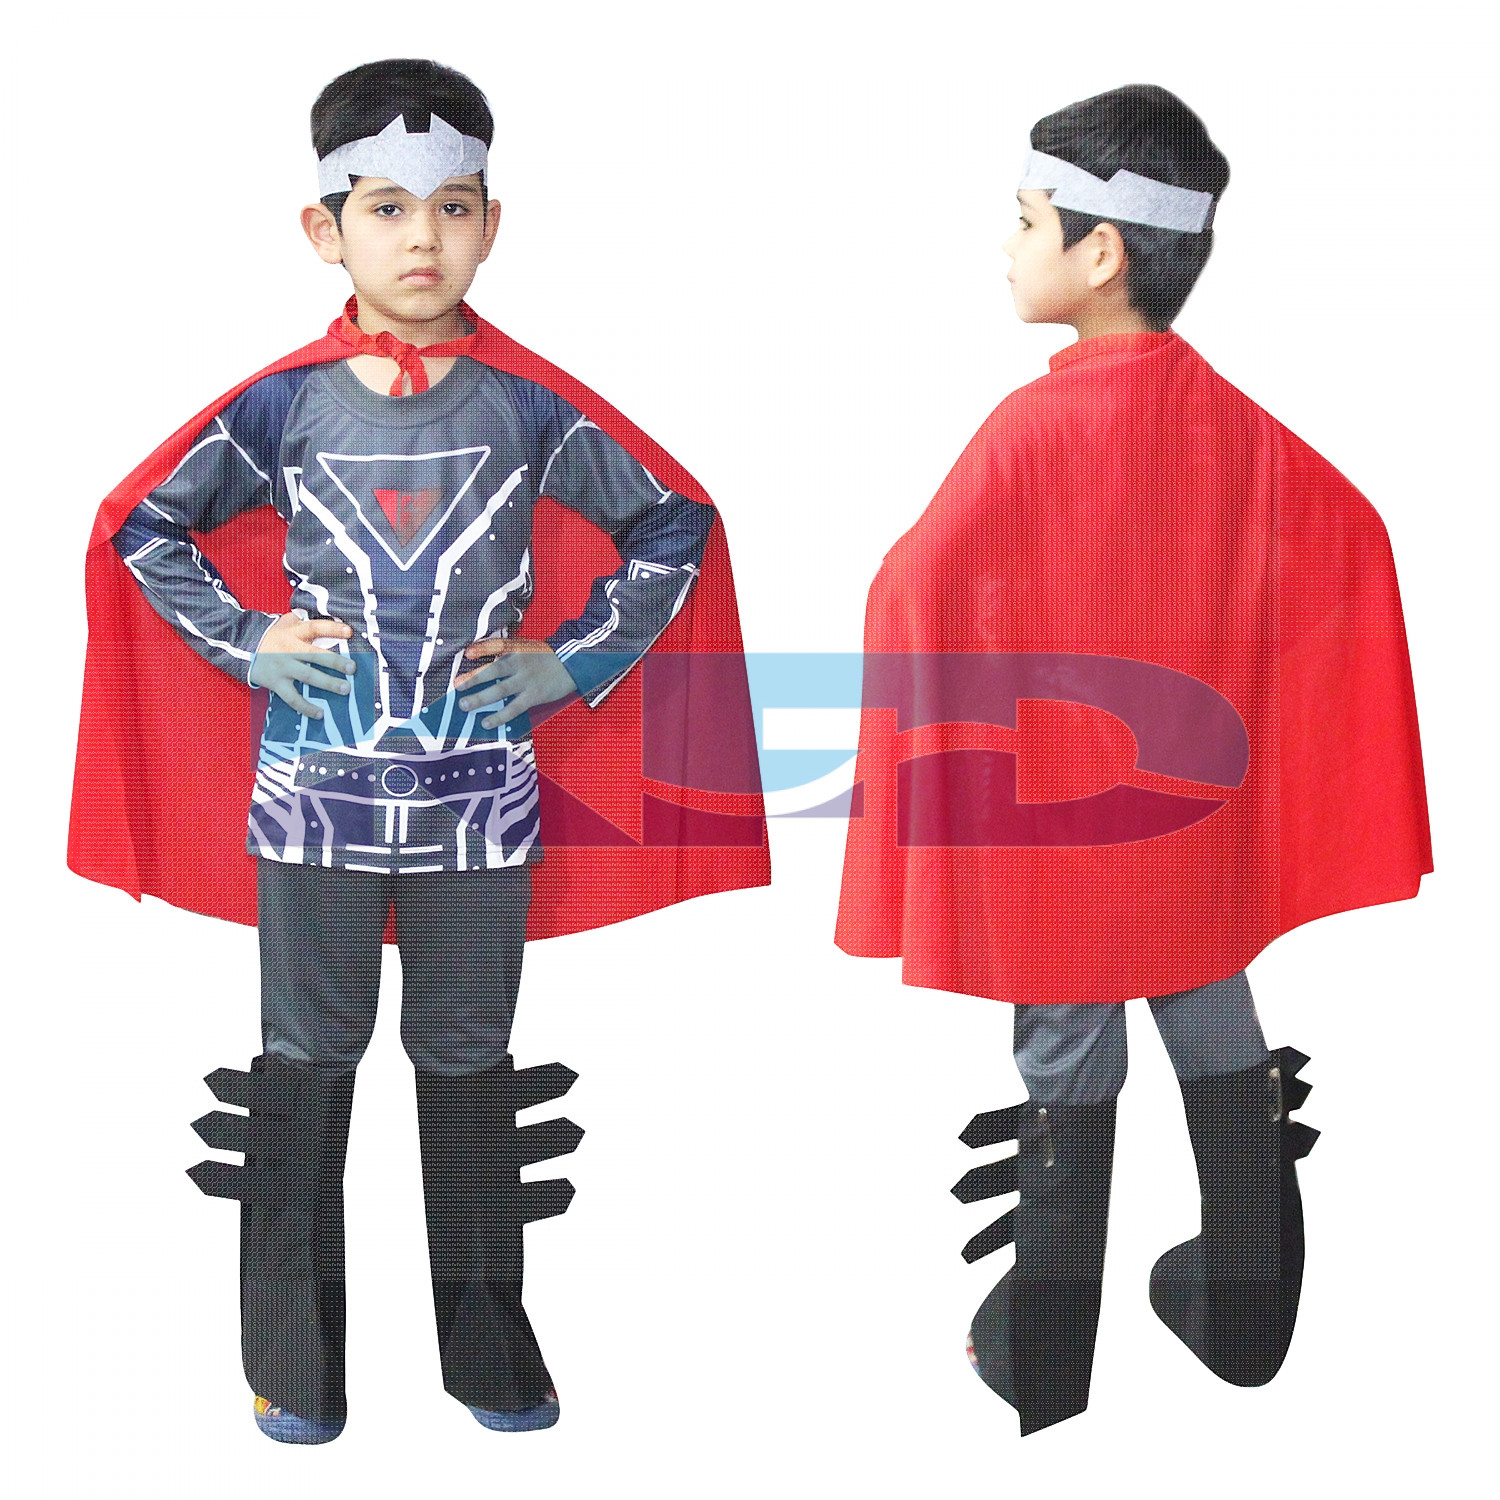 BV Returns fancy dress for kids,Super Hero Costume for Annual function/Theme Party/Competition/Stage Shows/Birthday Party Dress